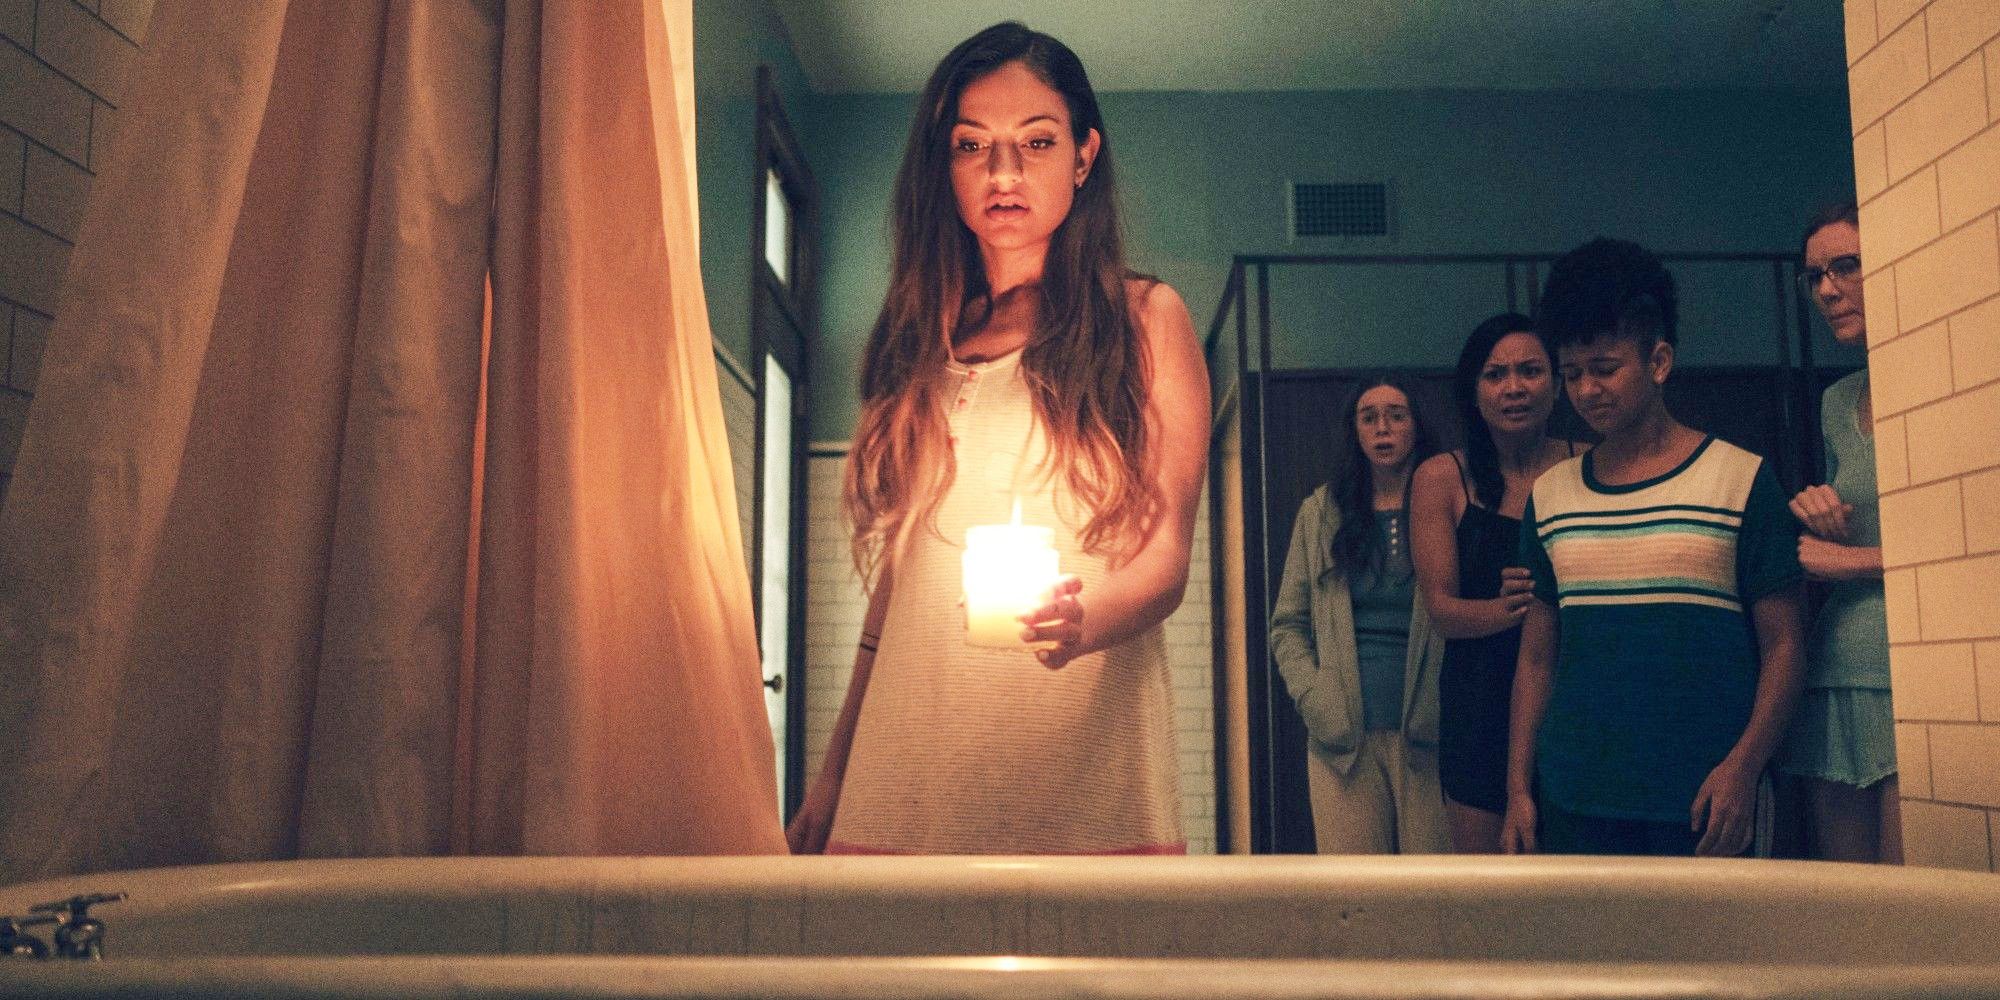 A girl holds candle over a bathtub in Seance.